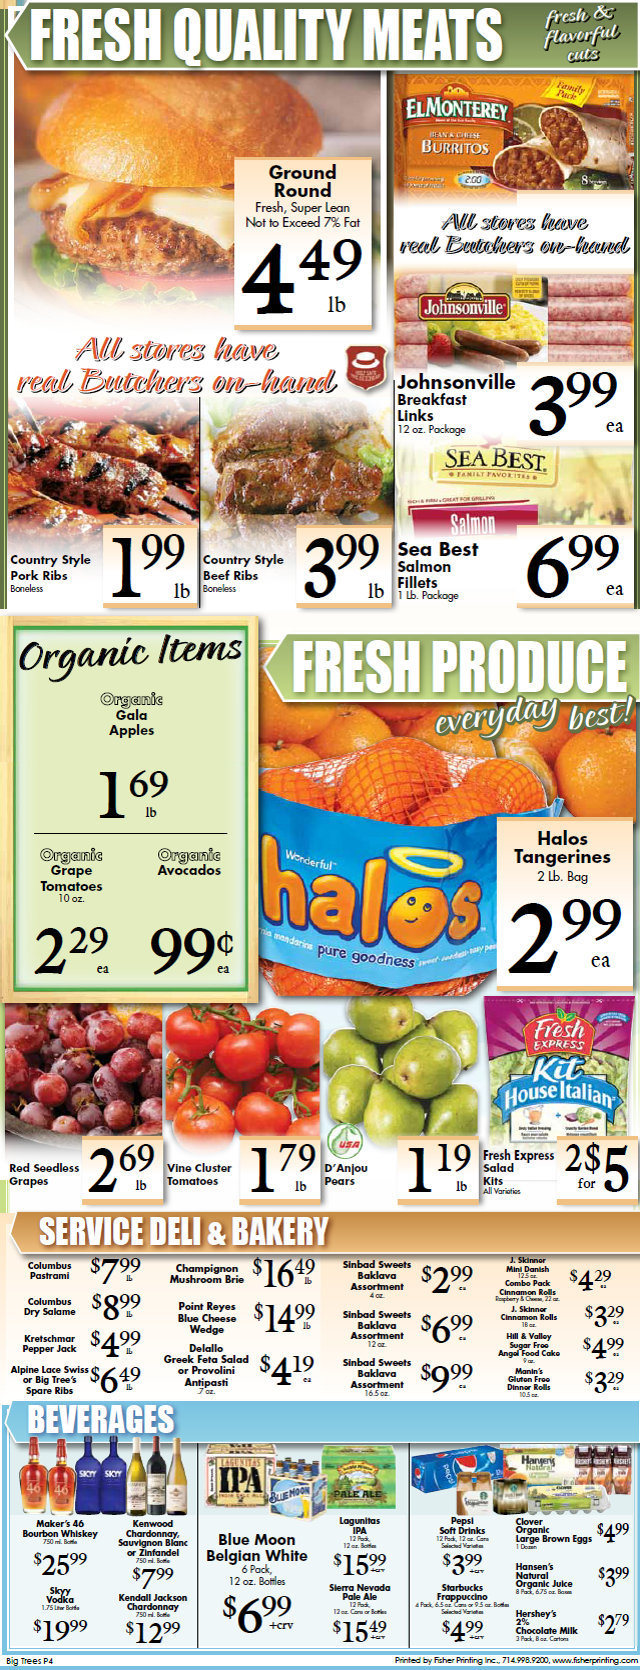 Big Trees Market Weekly Ad & Grocery Specials Through January 24th